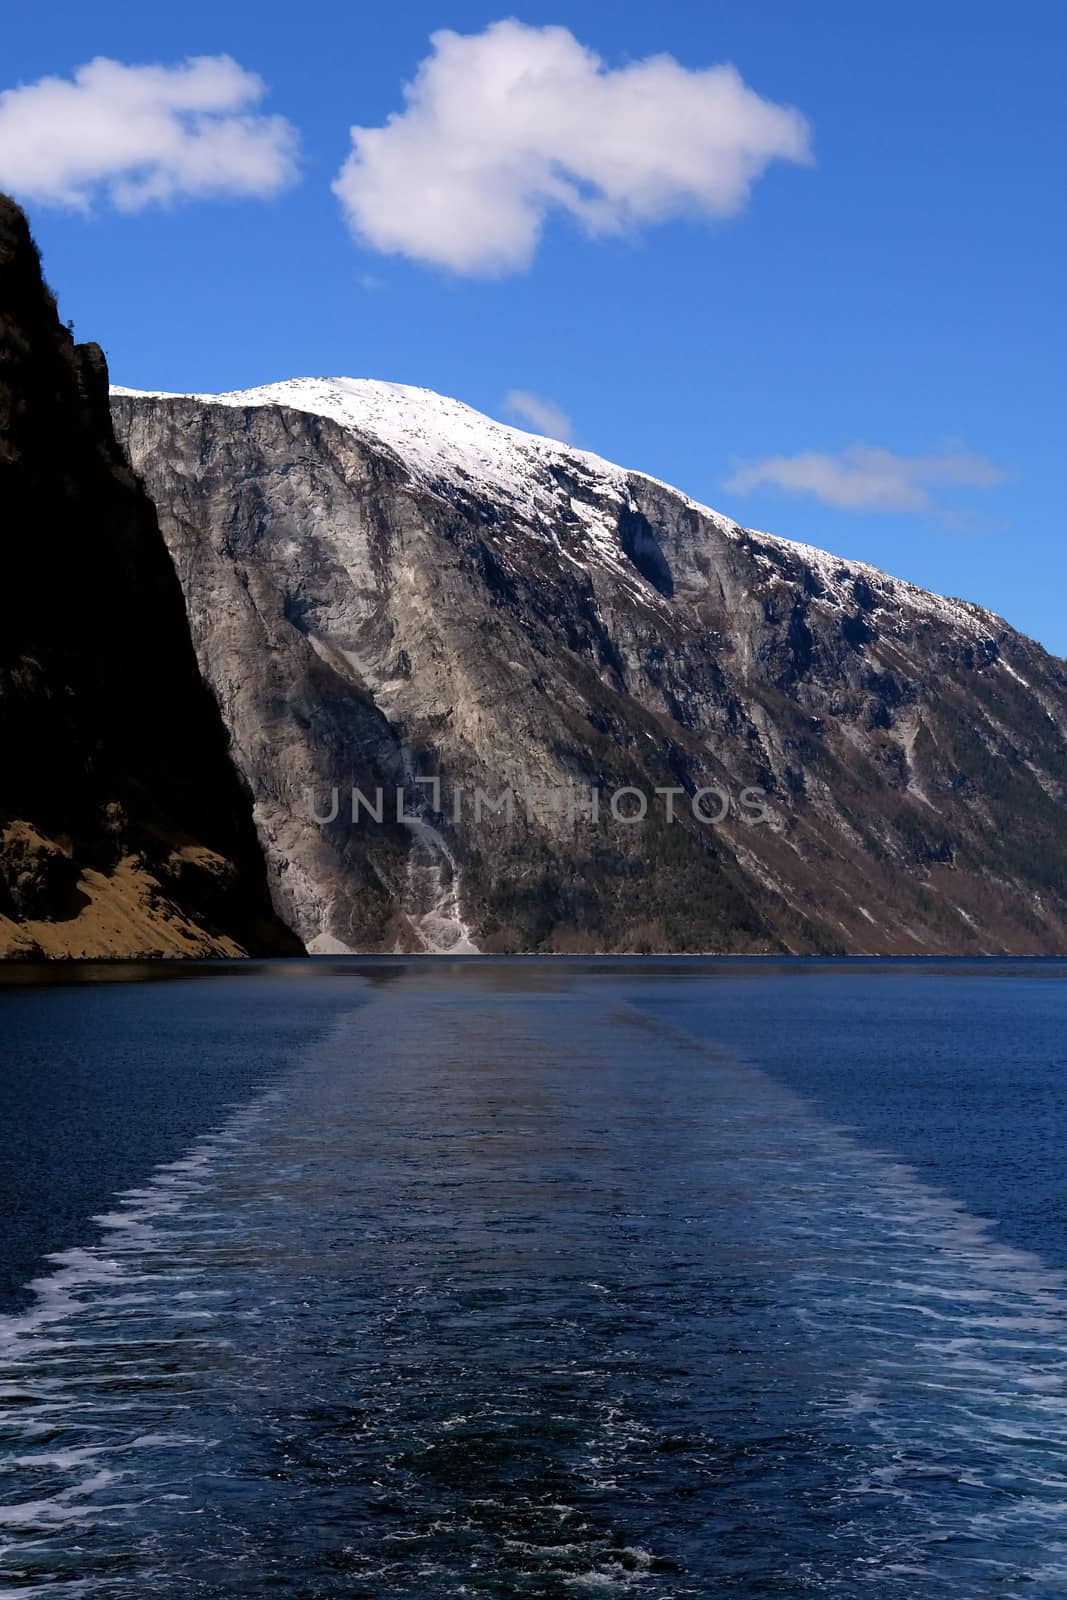 Fjord landscape and mountain in the backgroung by ptxgarfield